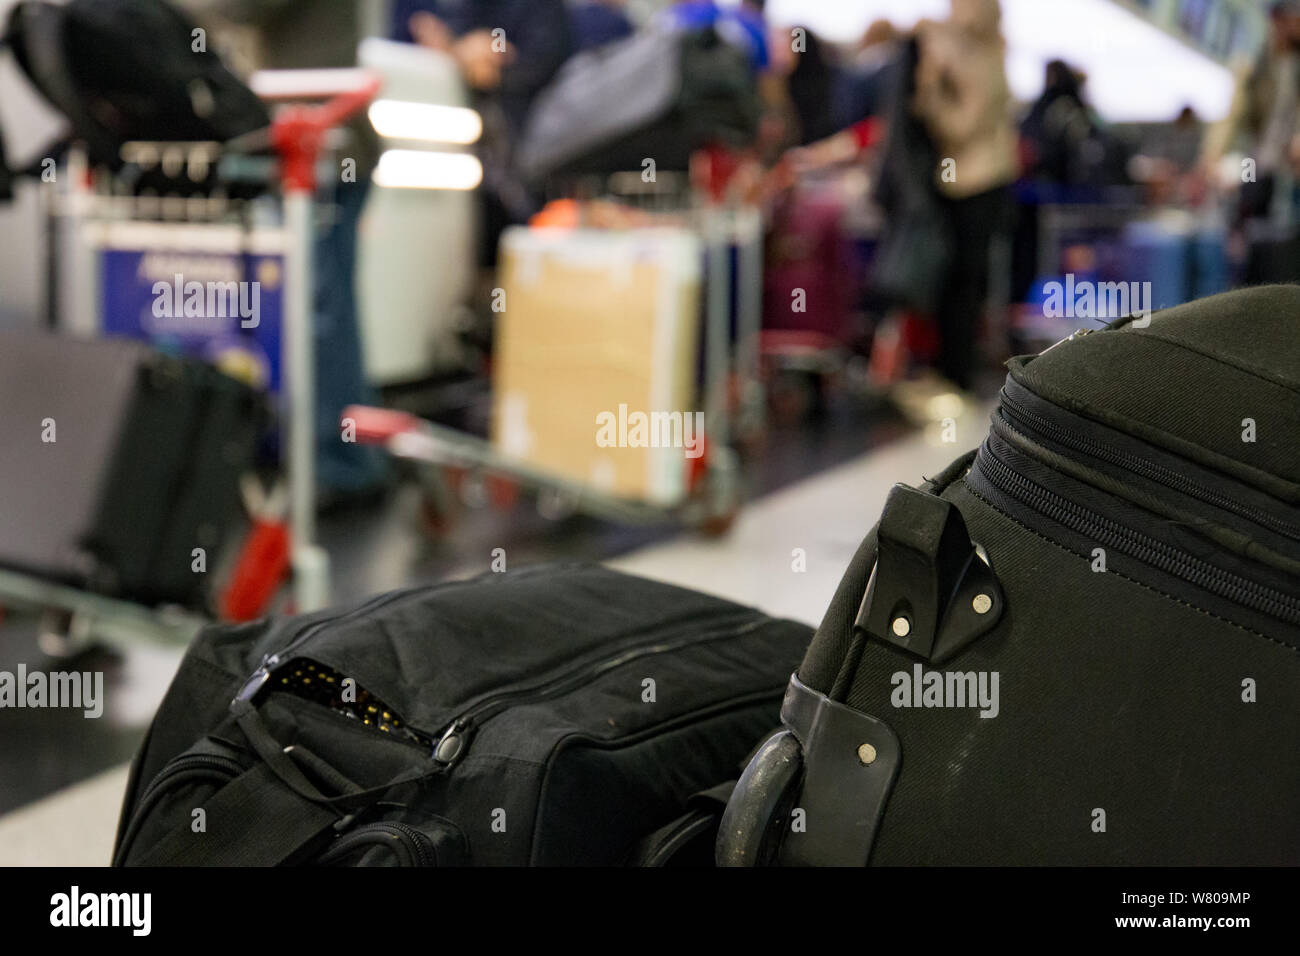 Travel luggage with people and baggage in background Stock Photo